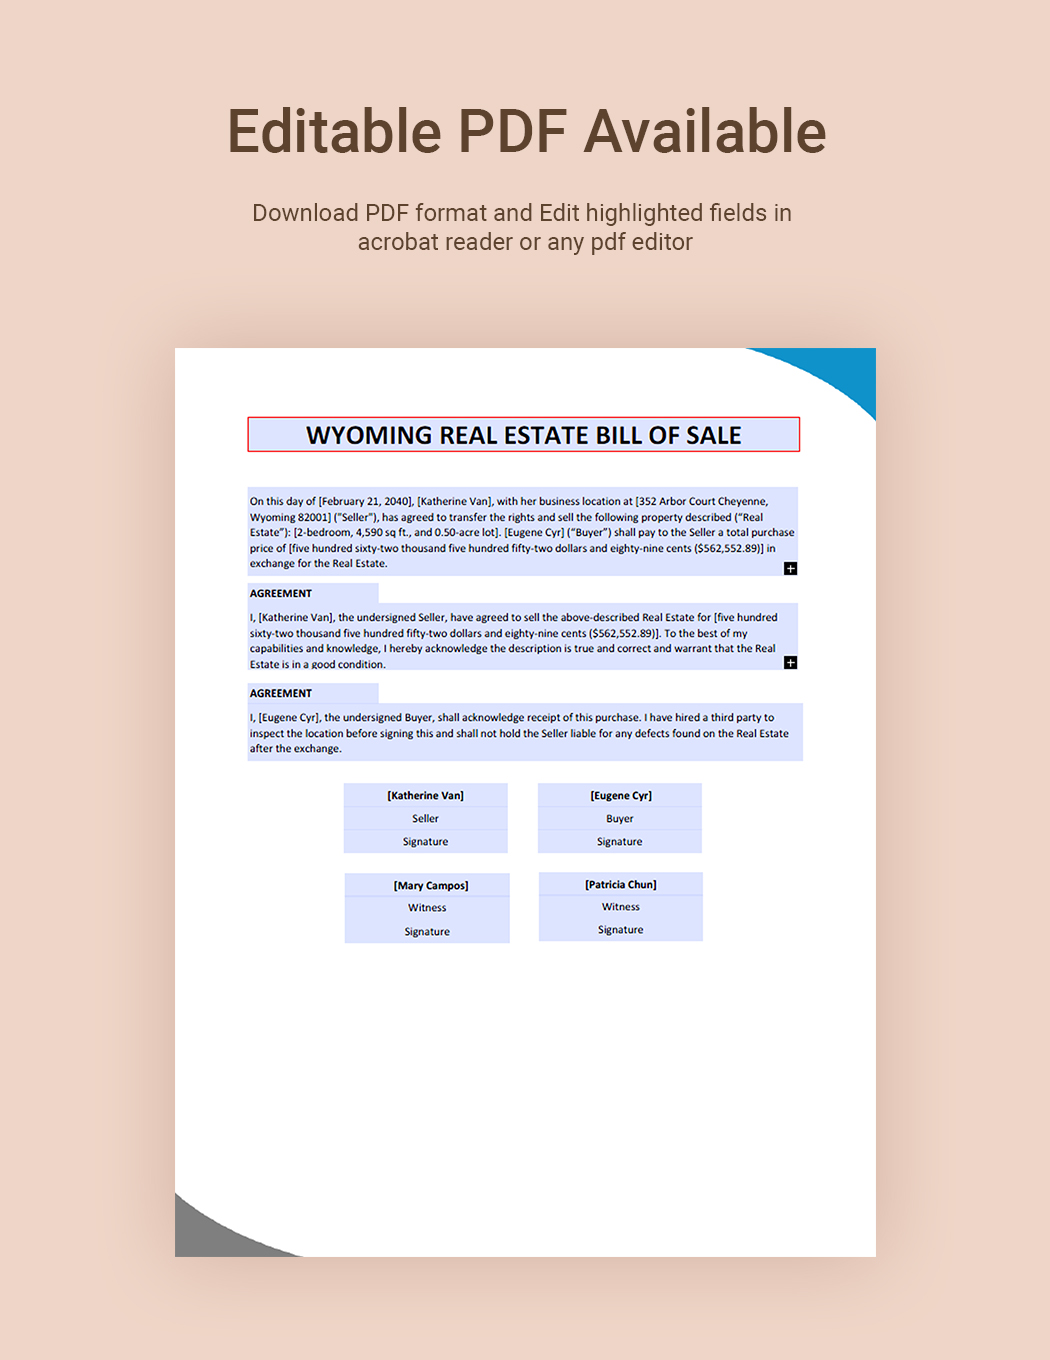 Wyoming Real Estate Bill of Sale Template